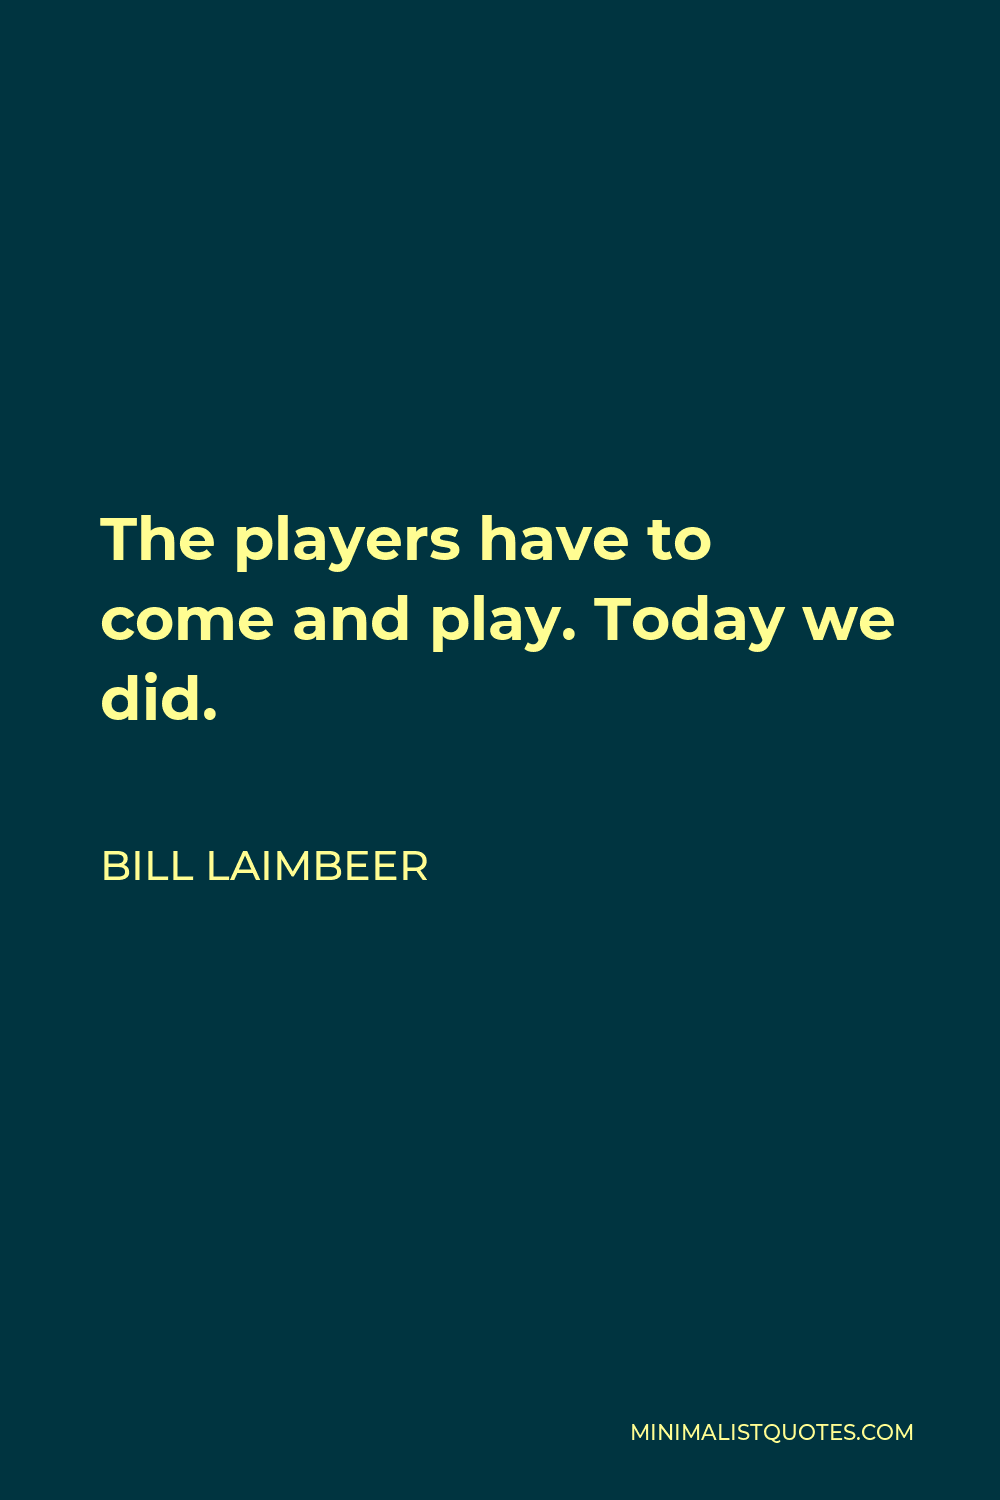 Bill Laimbeer Quote - The players have to come and play. Today we did.